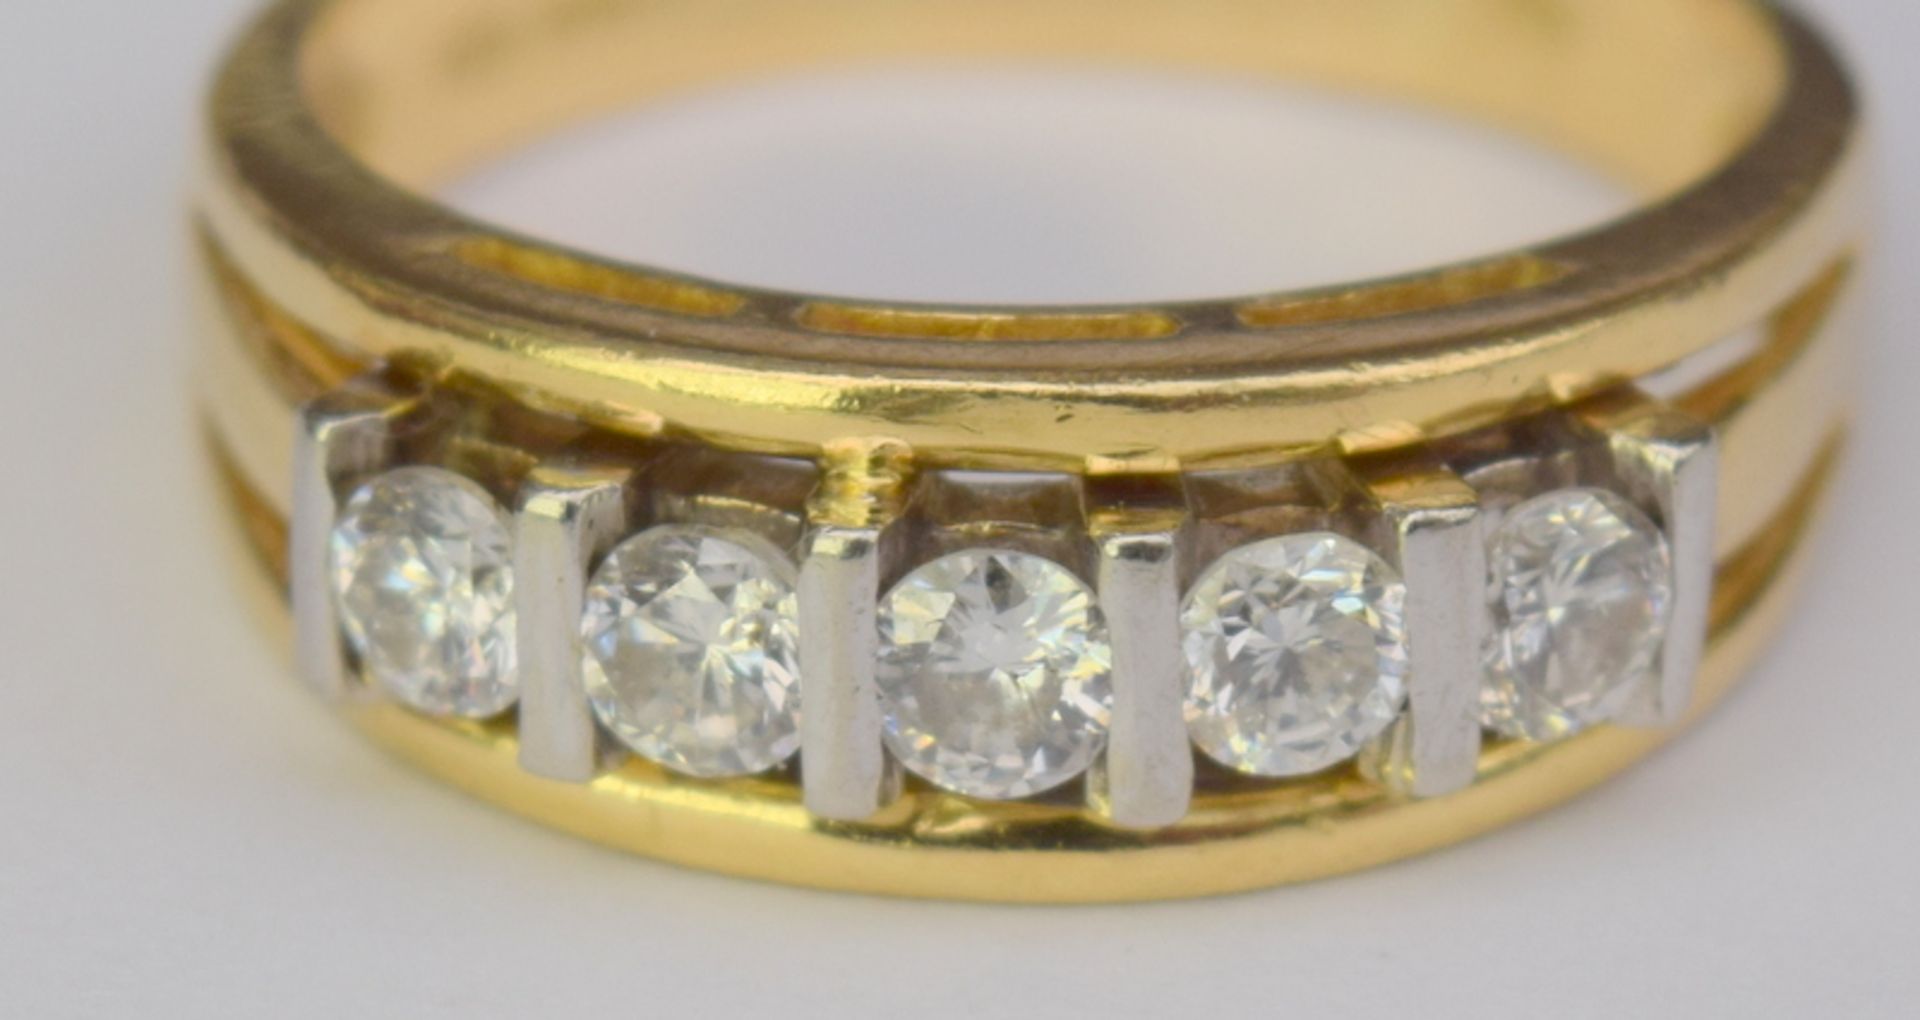 Excellent 18ct Gold And Platinum Mount Ring With Five Clear Diamonds - Image 6 of 7